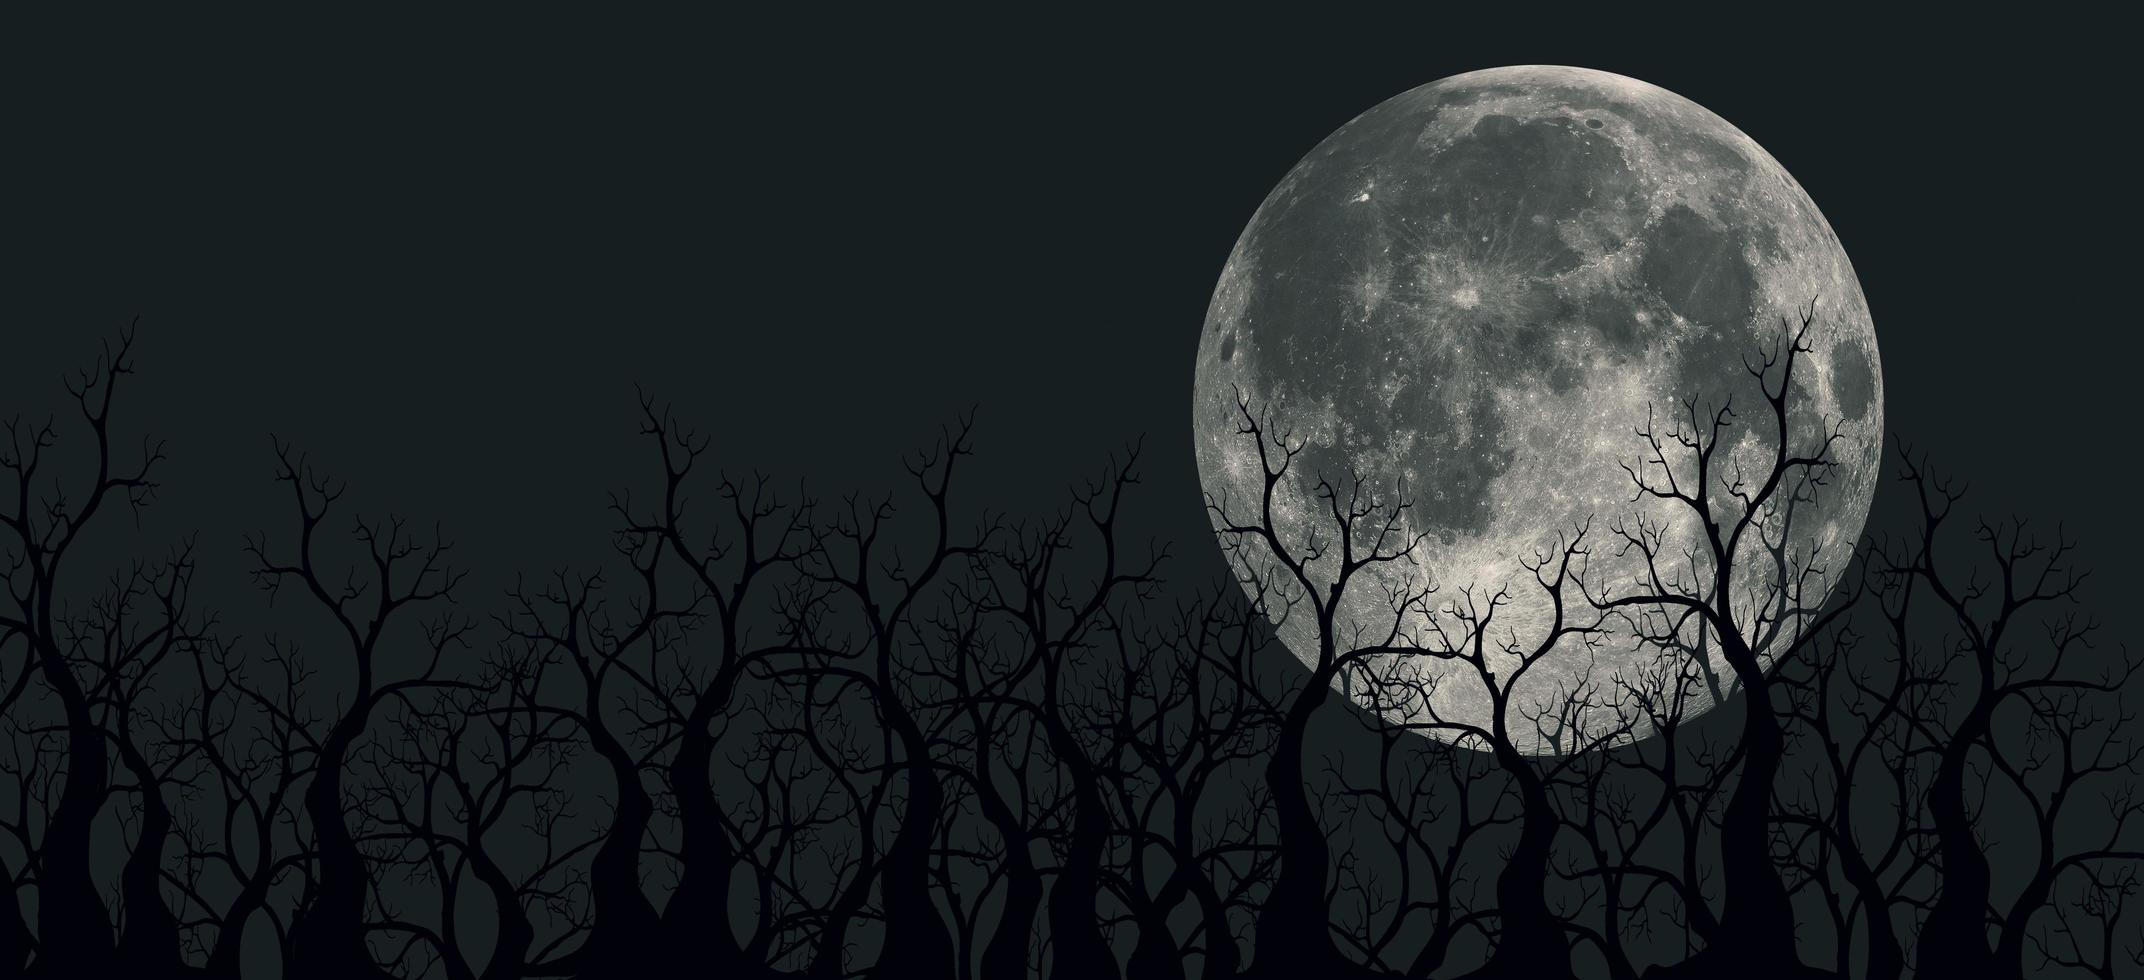 Spooky 3D illustration of panoramic mountains, trees and moon photo